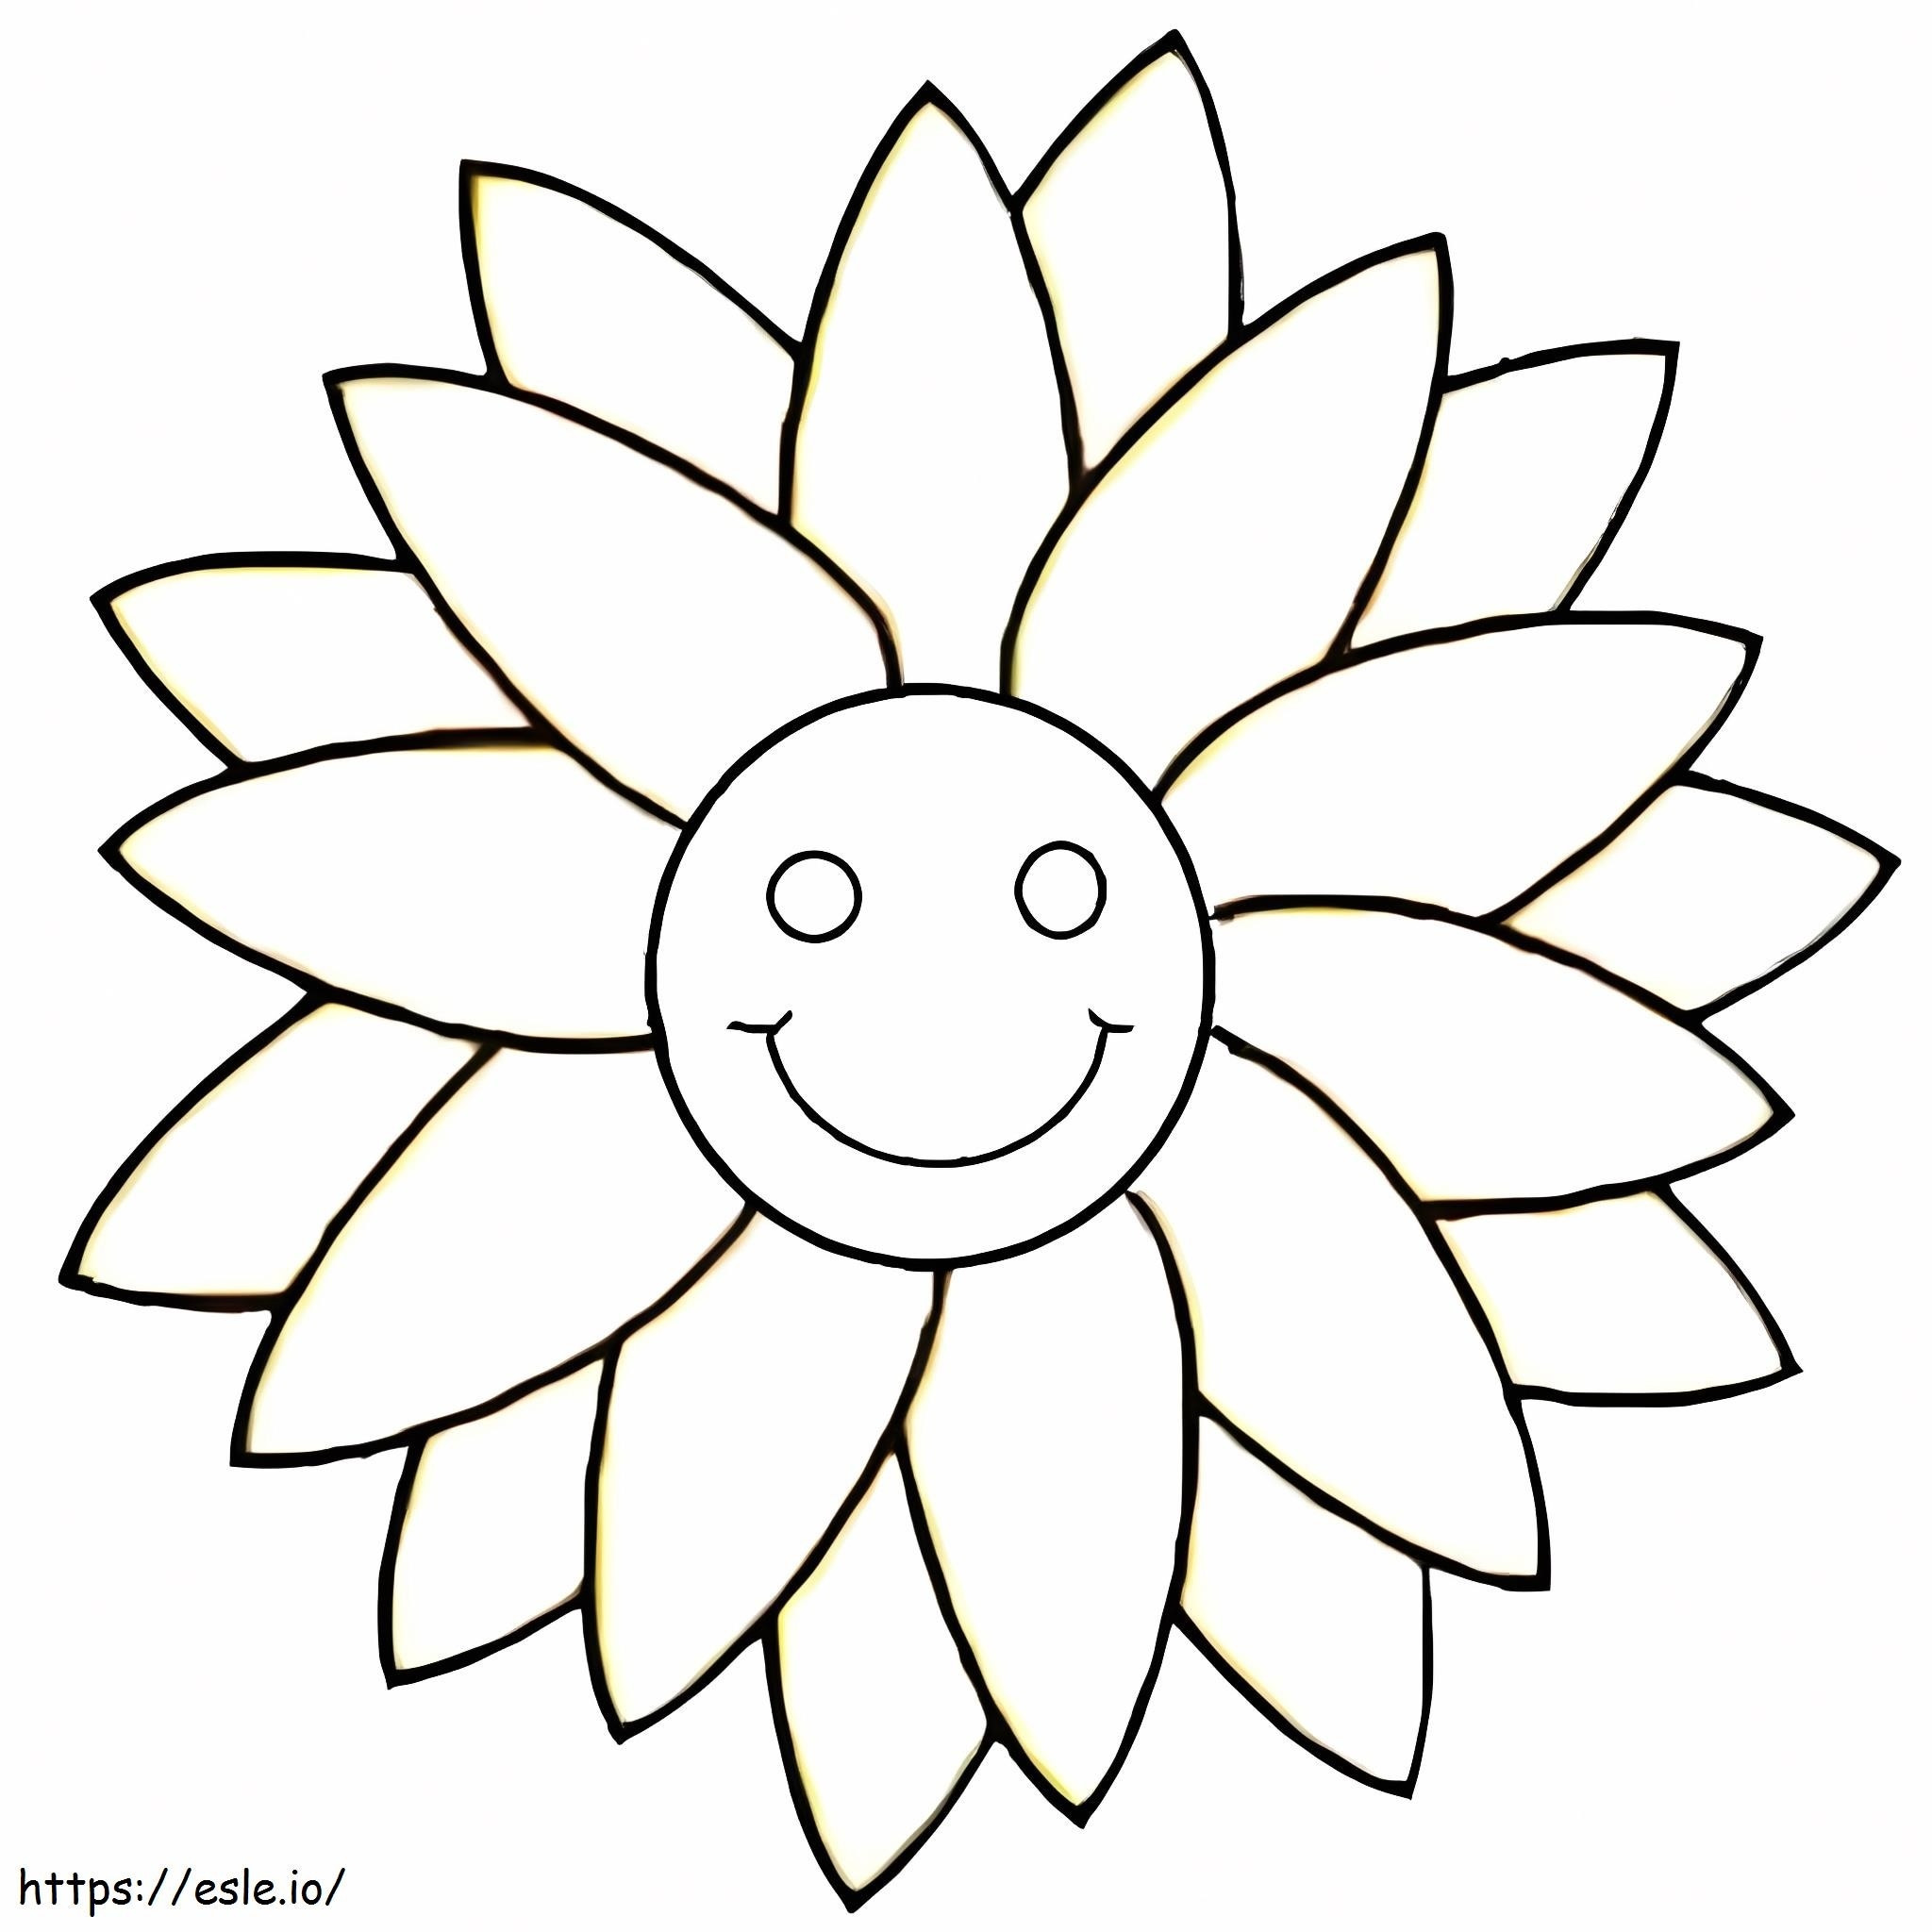 Flower Smiley Face coloring page